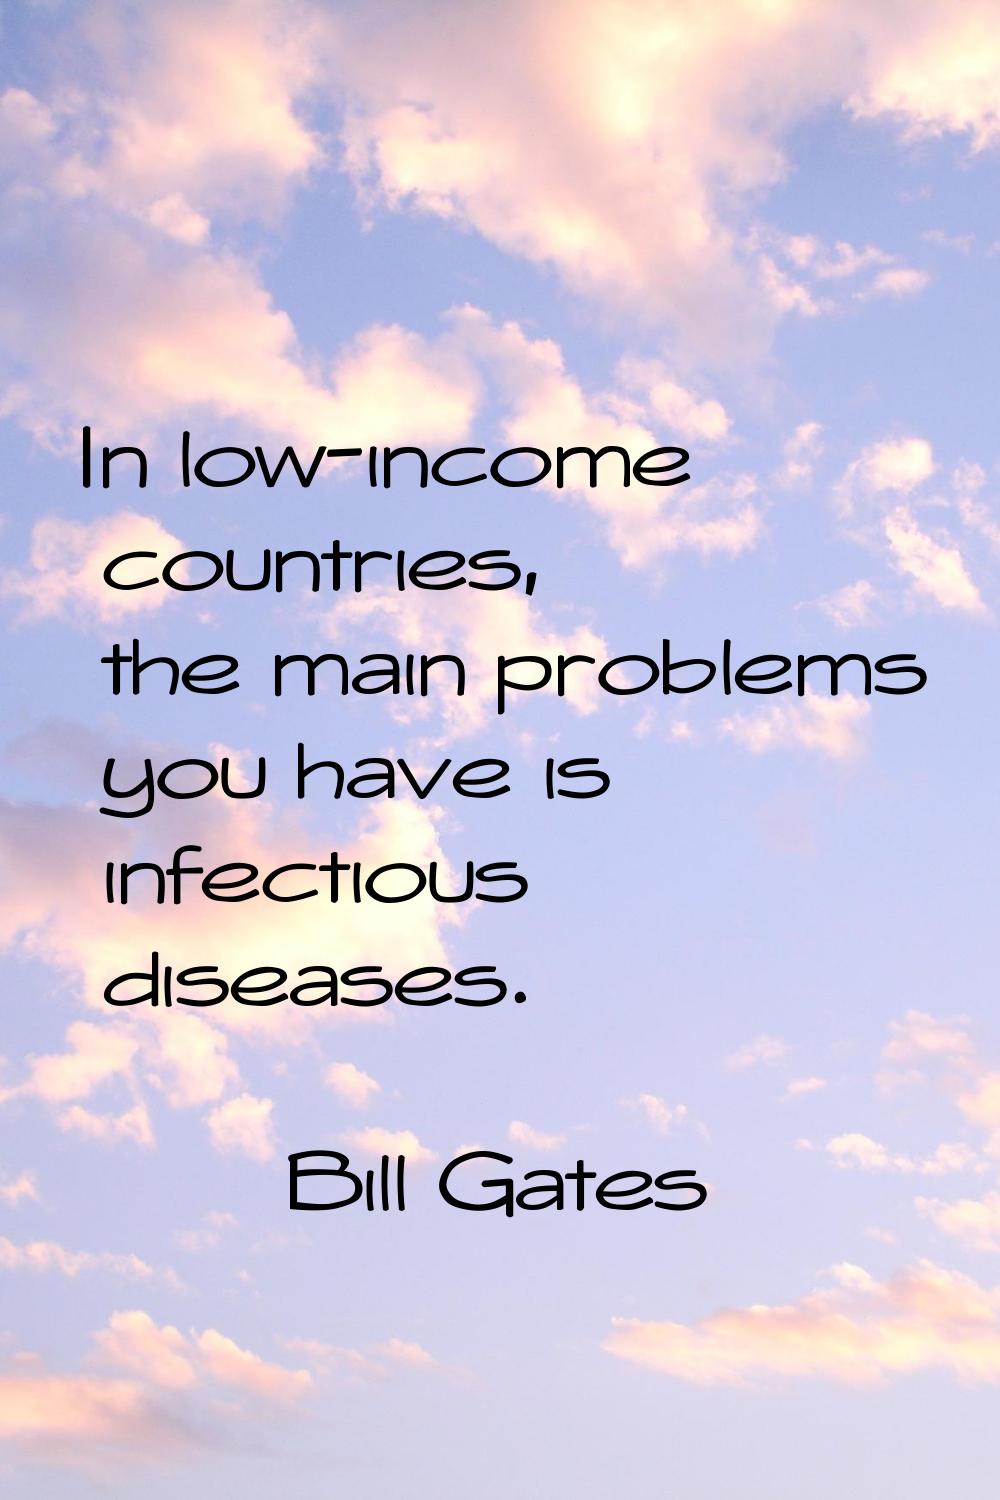 In low-income countries, the main problems you have is infectious diseases.